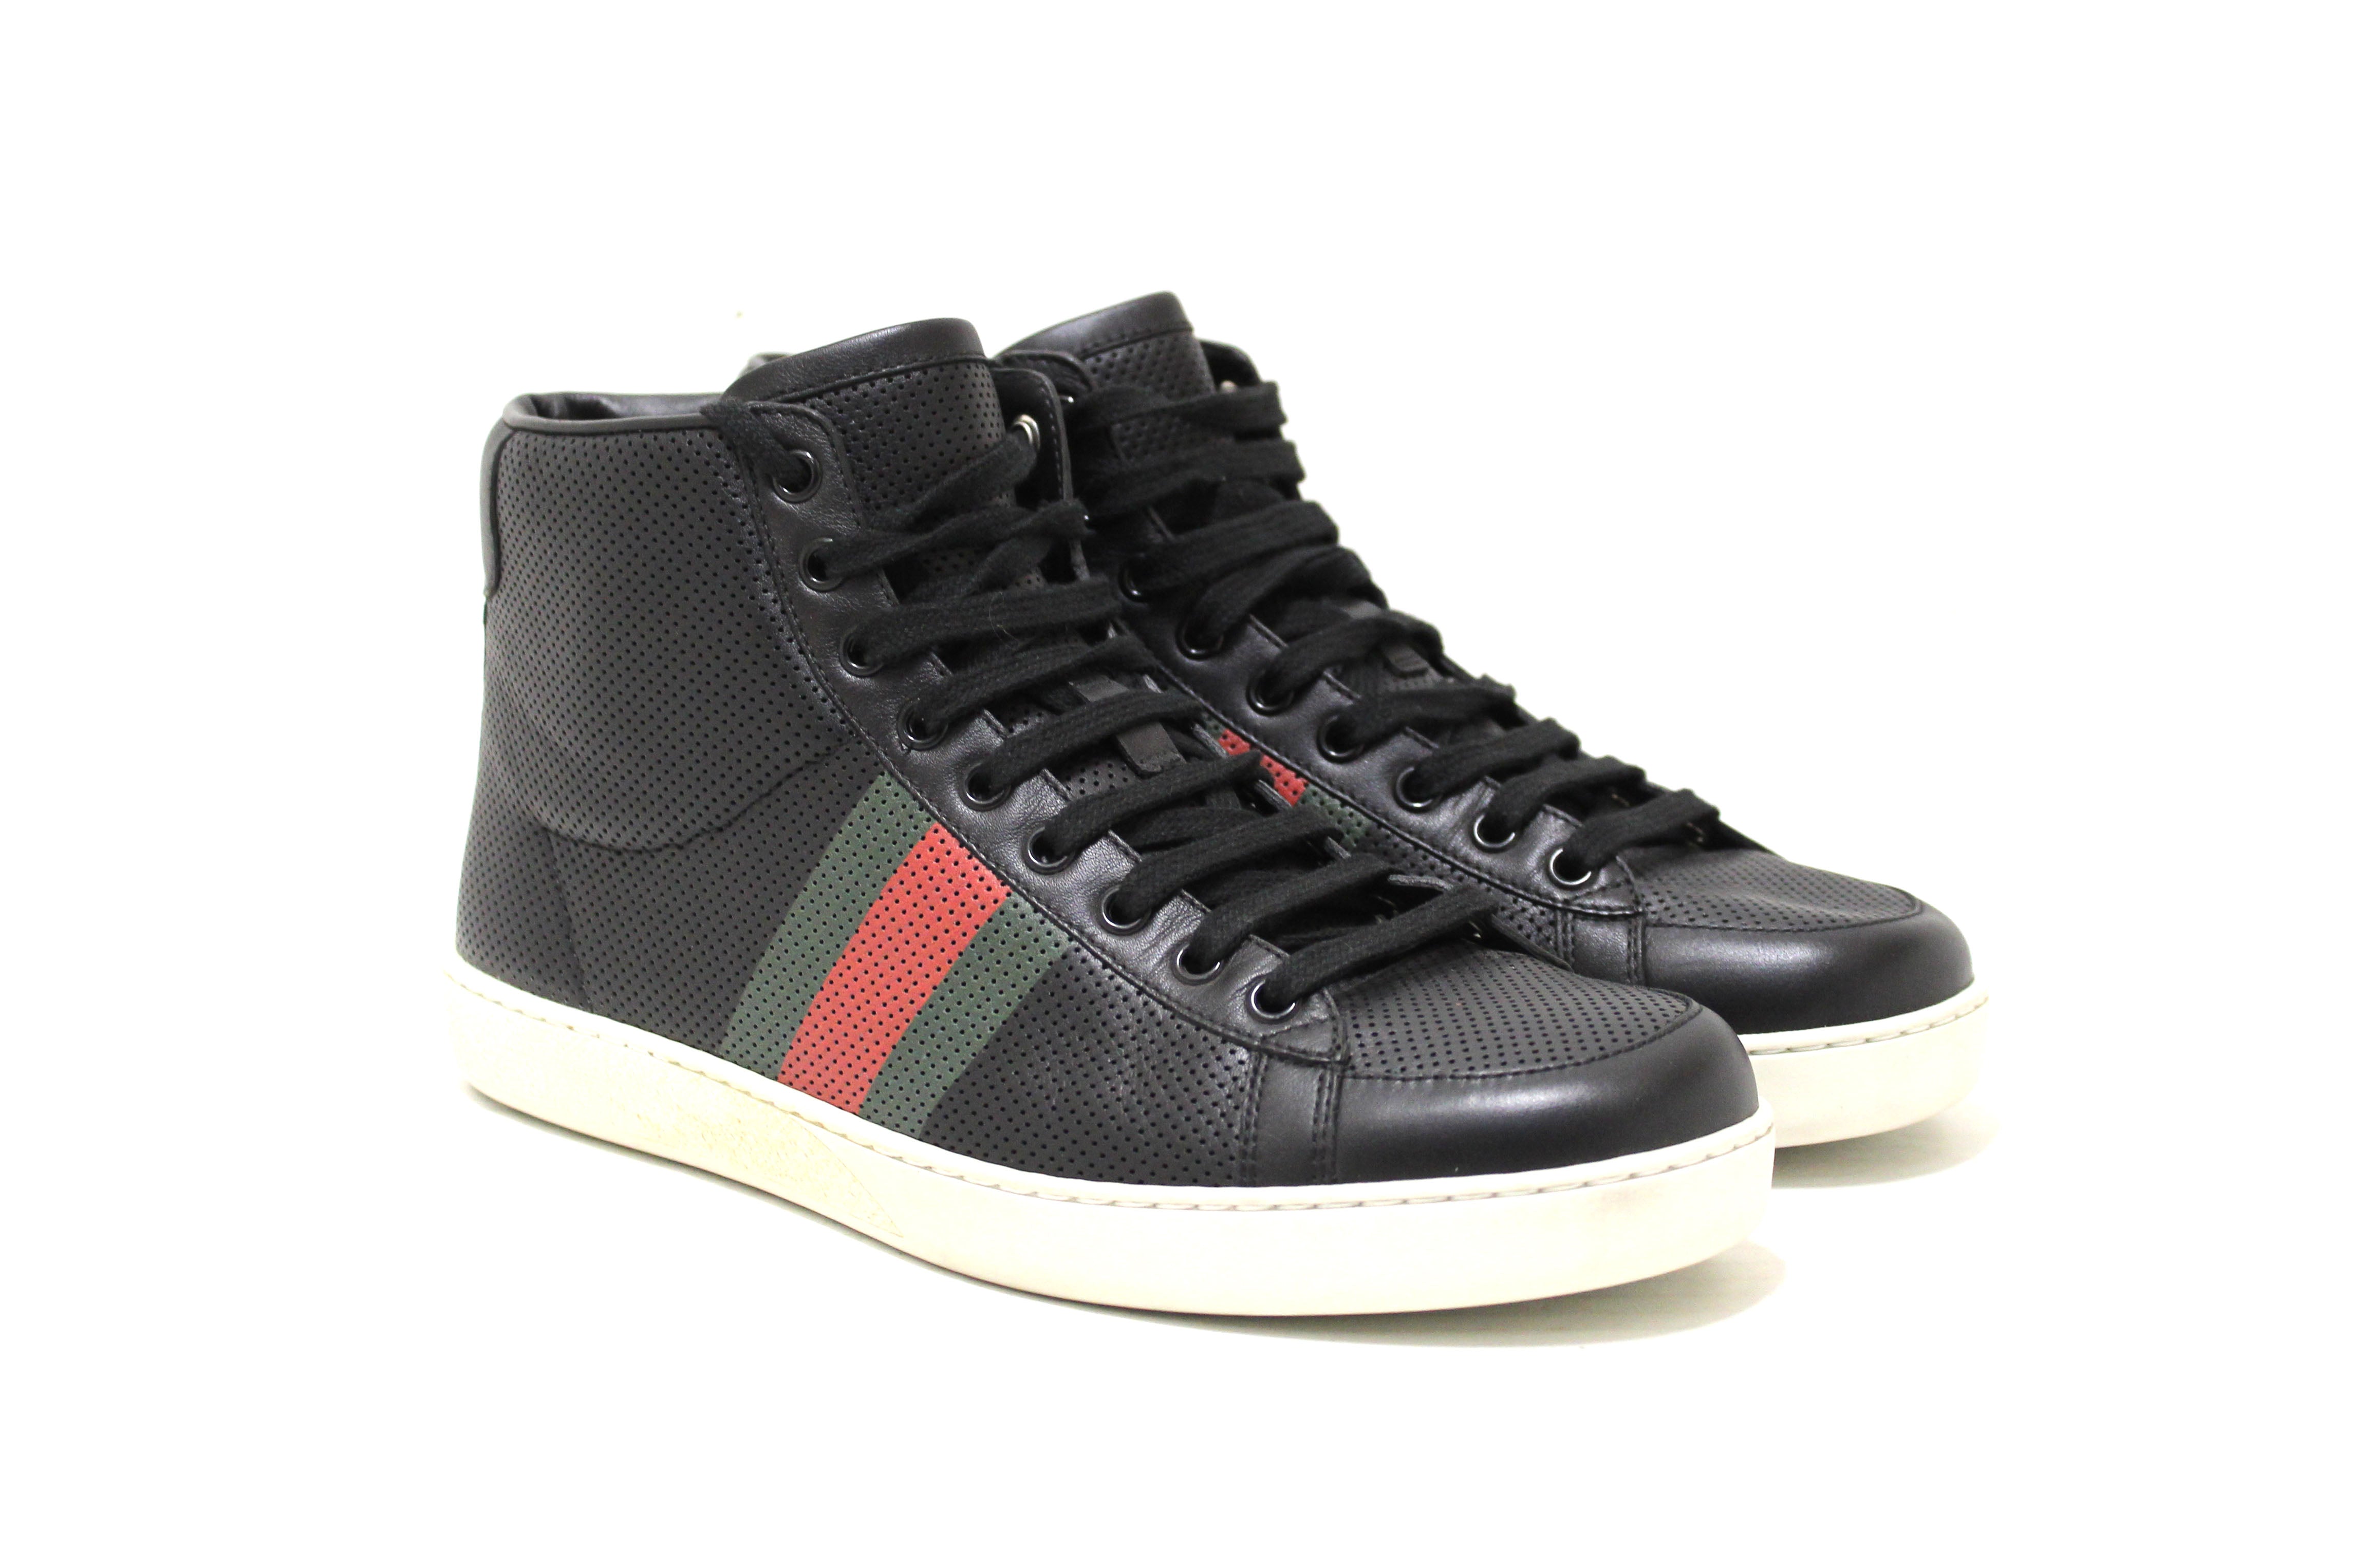 Authentic Gucci Men's Black Perforated Leather High Tops Sneakers Size 7.5